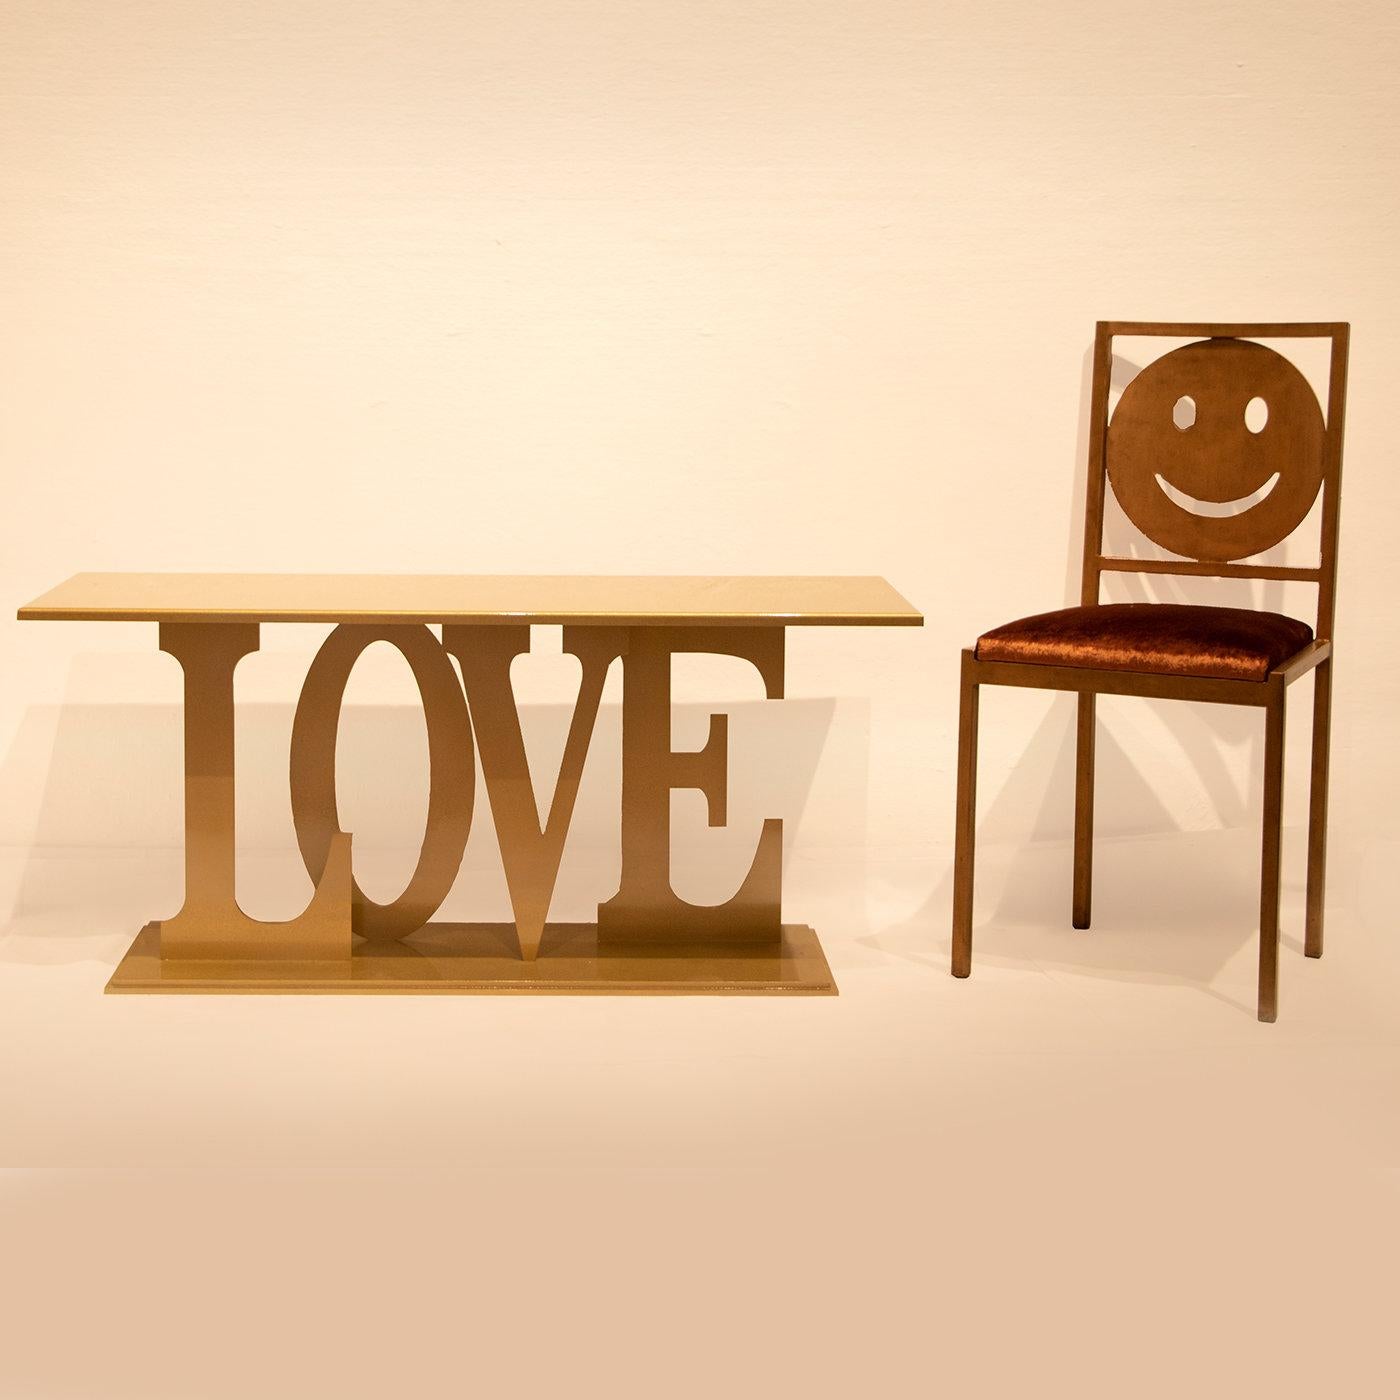 Imperfect Love Collection features chairs, coffee tables, consoles created by Giulia Ligresti characterized by a distinct, typographic design. Made by hand by skilled Italian craftsmen, this console features an iron frame with brushed gold-painted